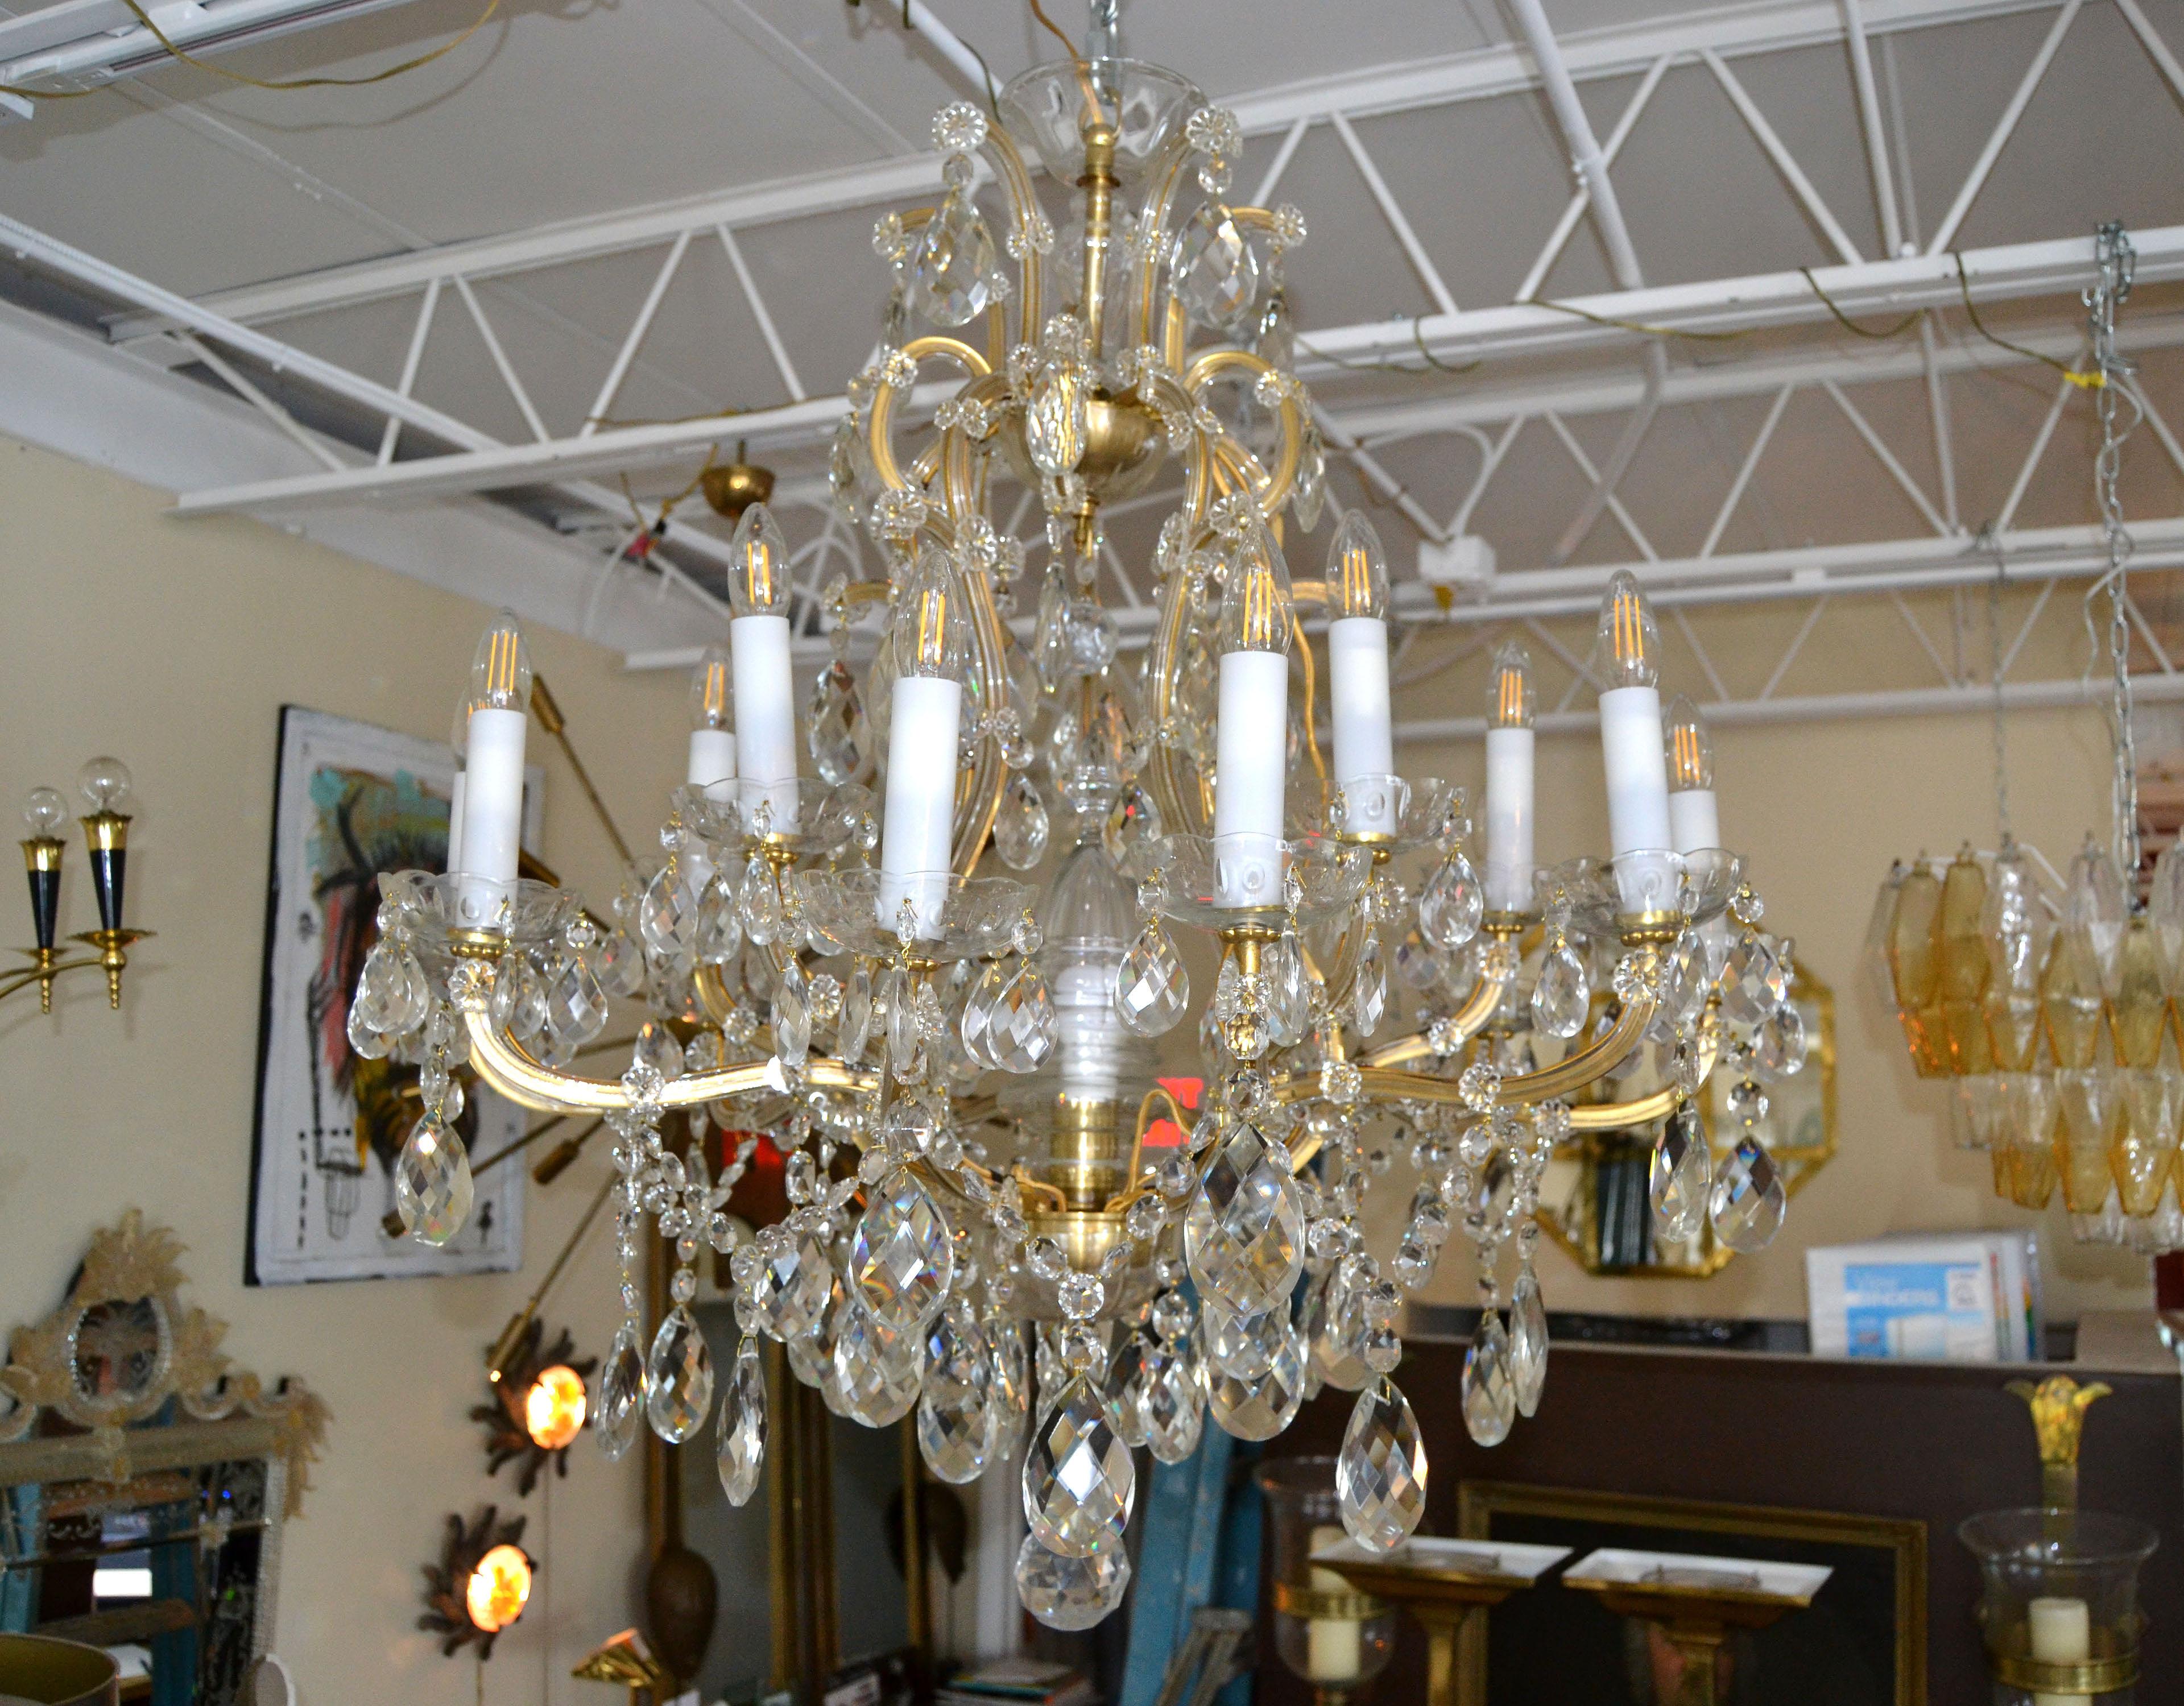 A glamorous Maria Theresa sixteenth-light chandelier or hanging fixture (35 inches diameter) of faceted crystal, cut glass and gilt metal featuring serpentine arms.
Made in Czechoslovakia and each candlelight with Bohemian glass flowers, dangling